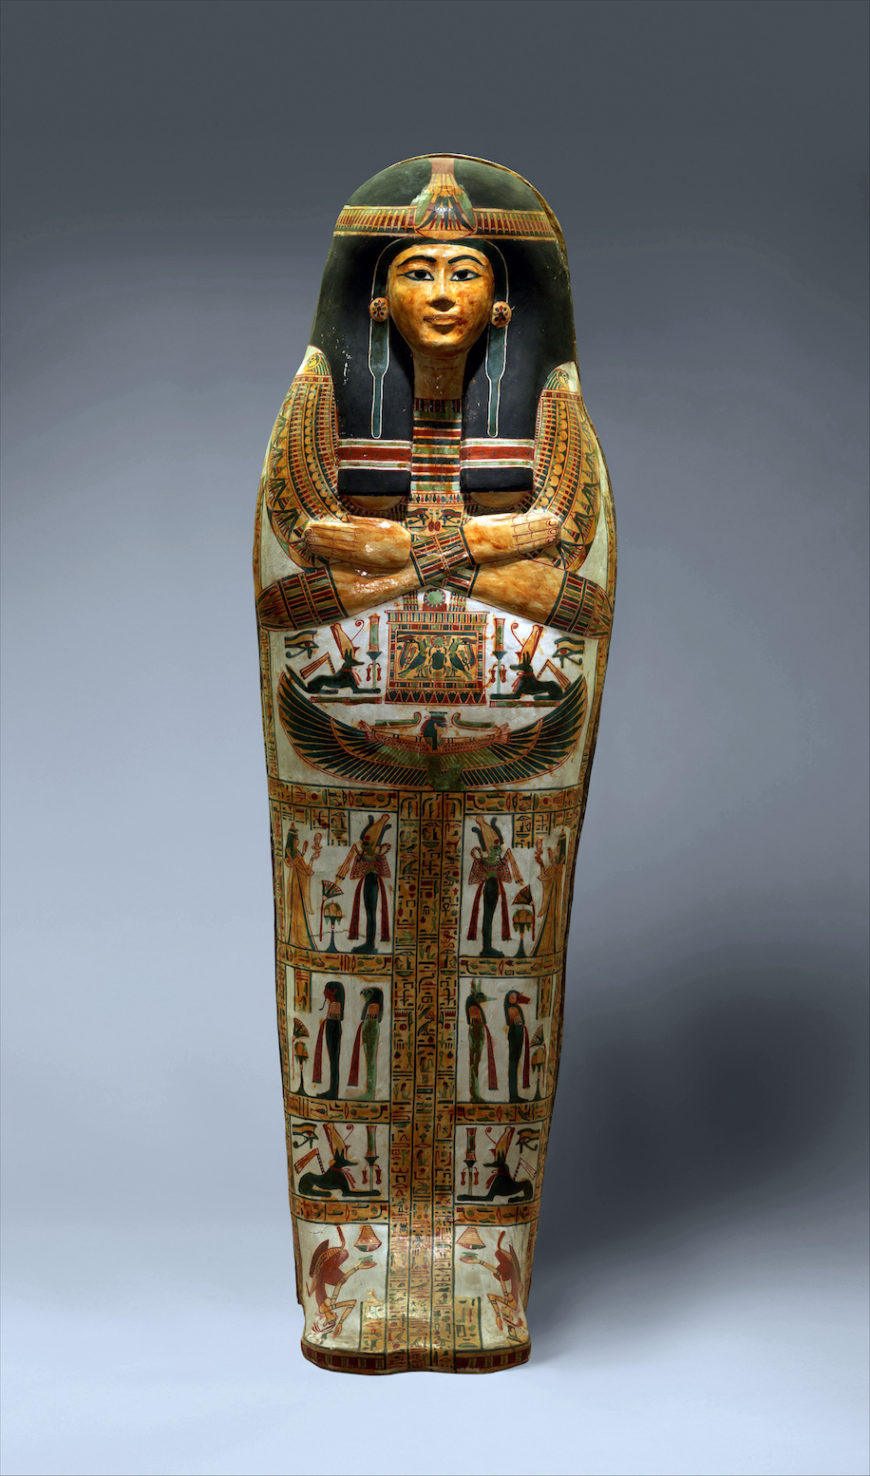 Outer Coffin of the Singer of Amun-Re, Henettawy, c. 1000–945 B.C.E., Third Intermediate Period, wood, gesso, paint, varnish, from Egypt, Upper Egypt, Thebes, Deir el-Bahri, Tomb of Henettawy F , 203 cm long (The Metropolitan Museum of Art)